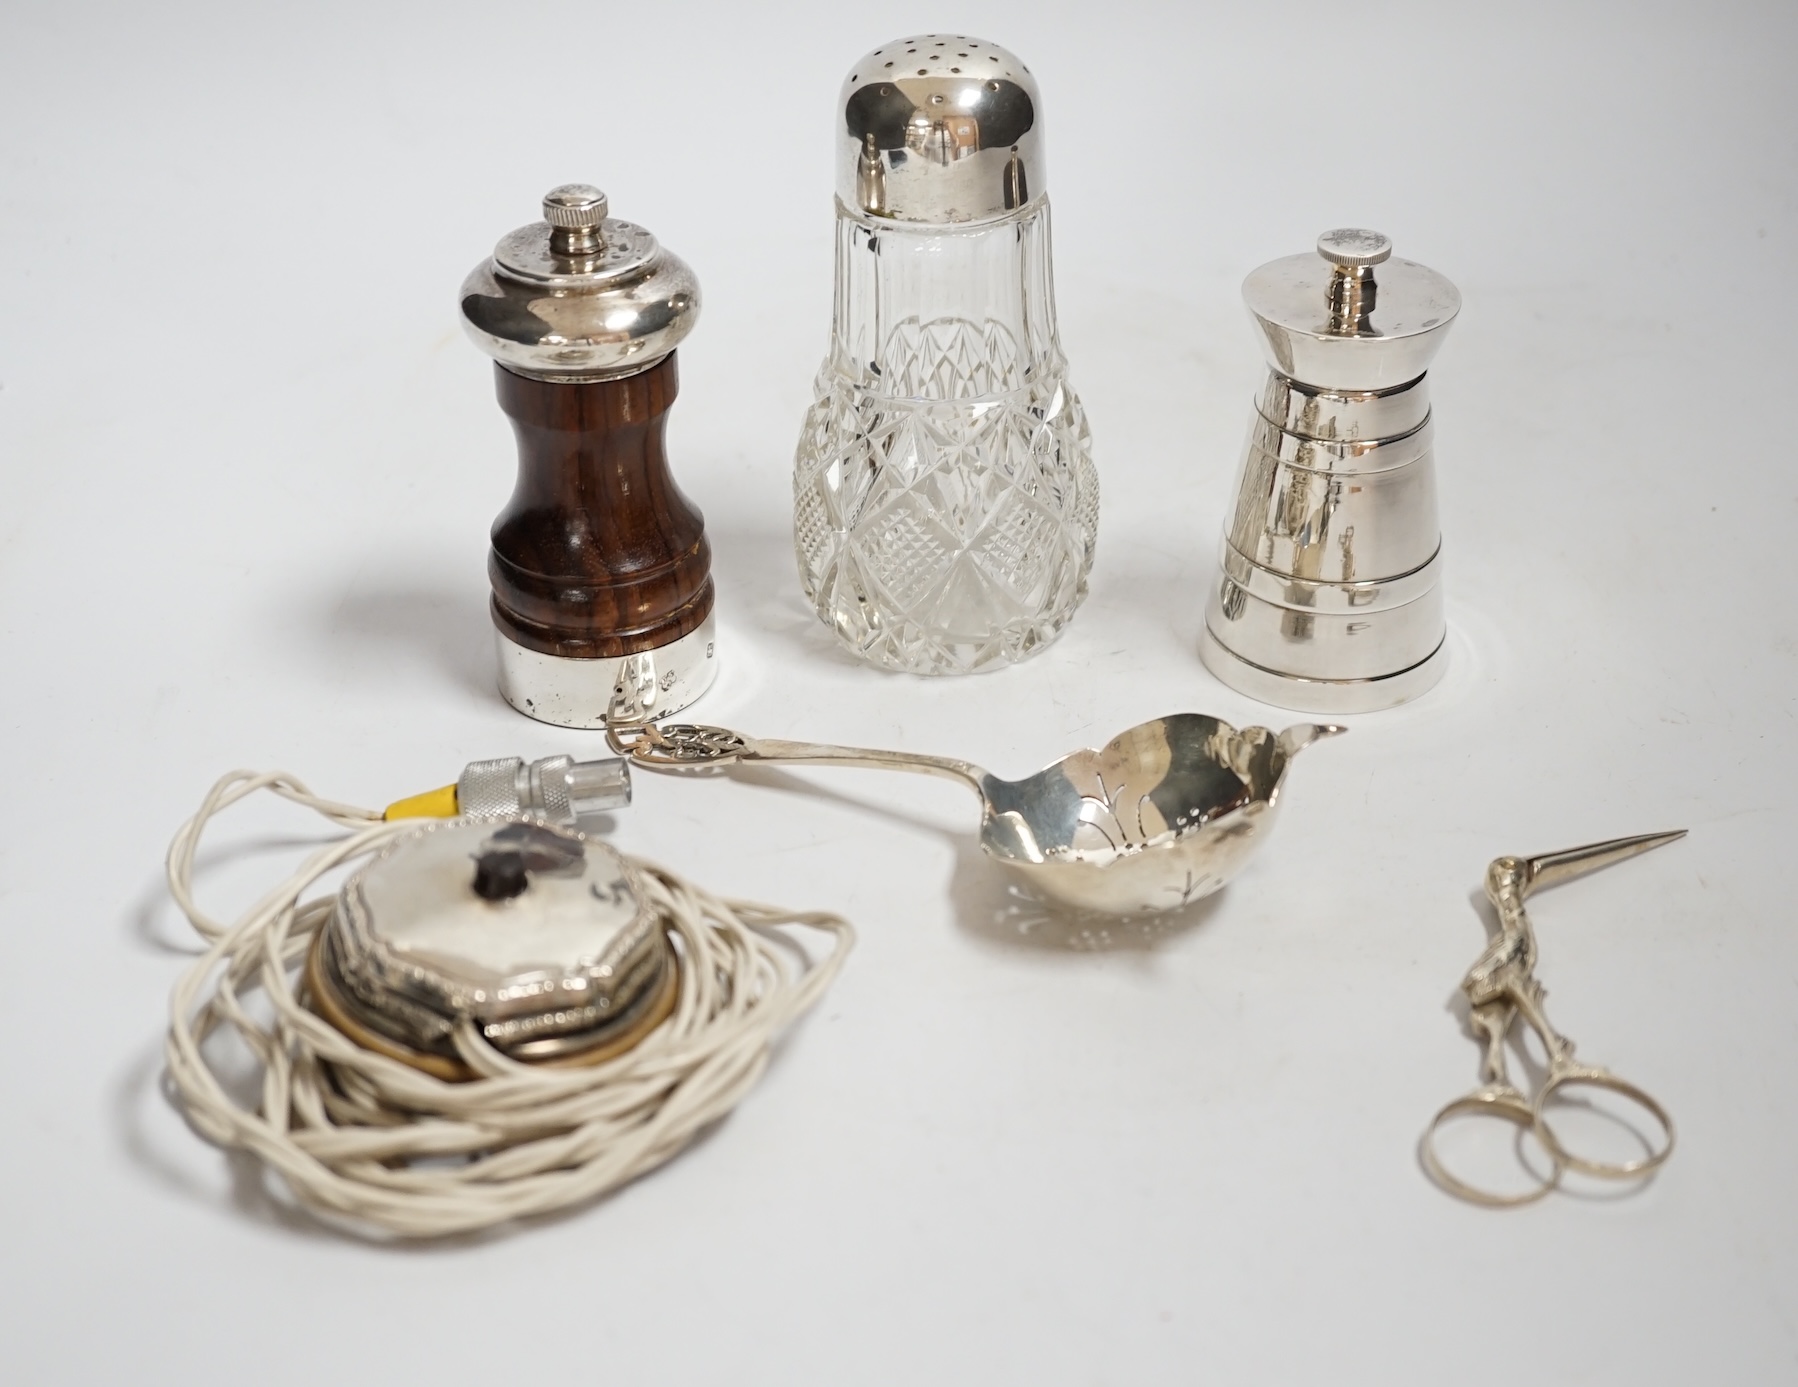 Two modern silver mounted pepper mills, largest 10.2cm, a silver tea strainer, 800 standard white metal mounted glass caster and sundry other items.